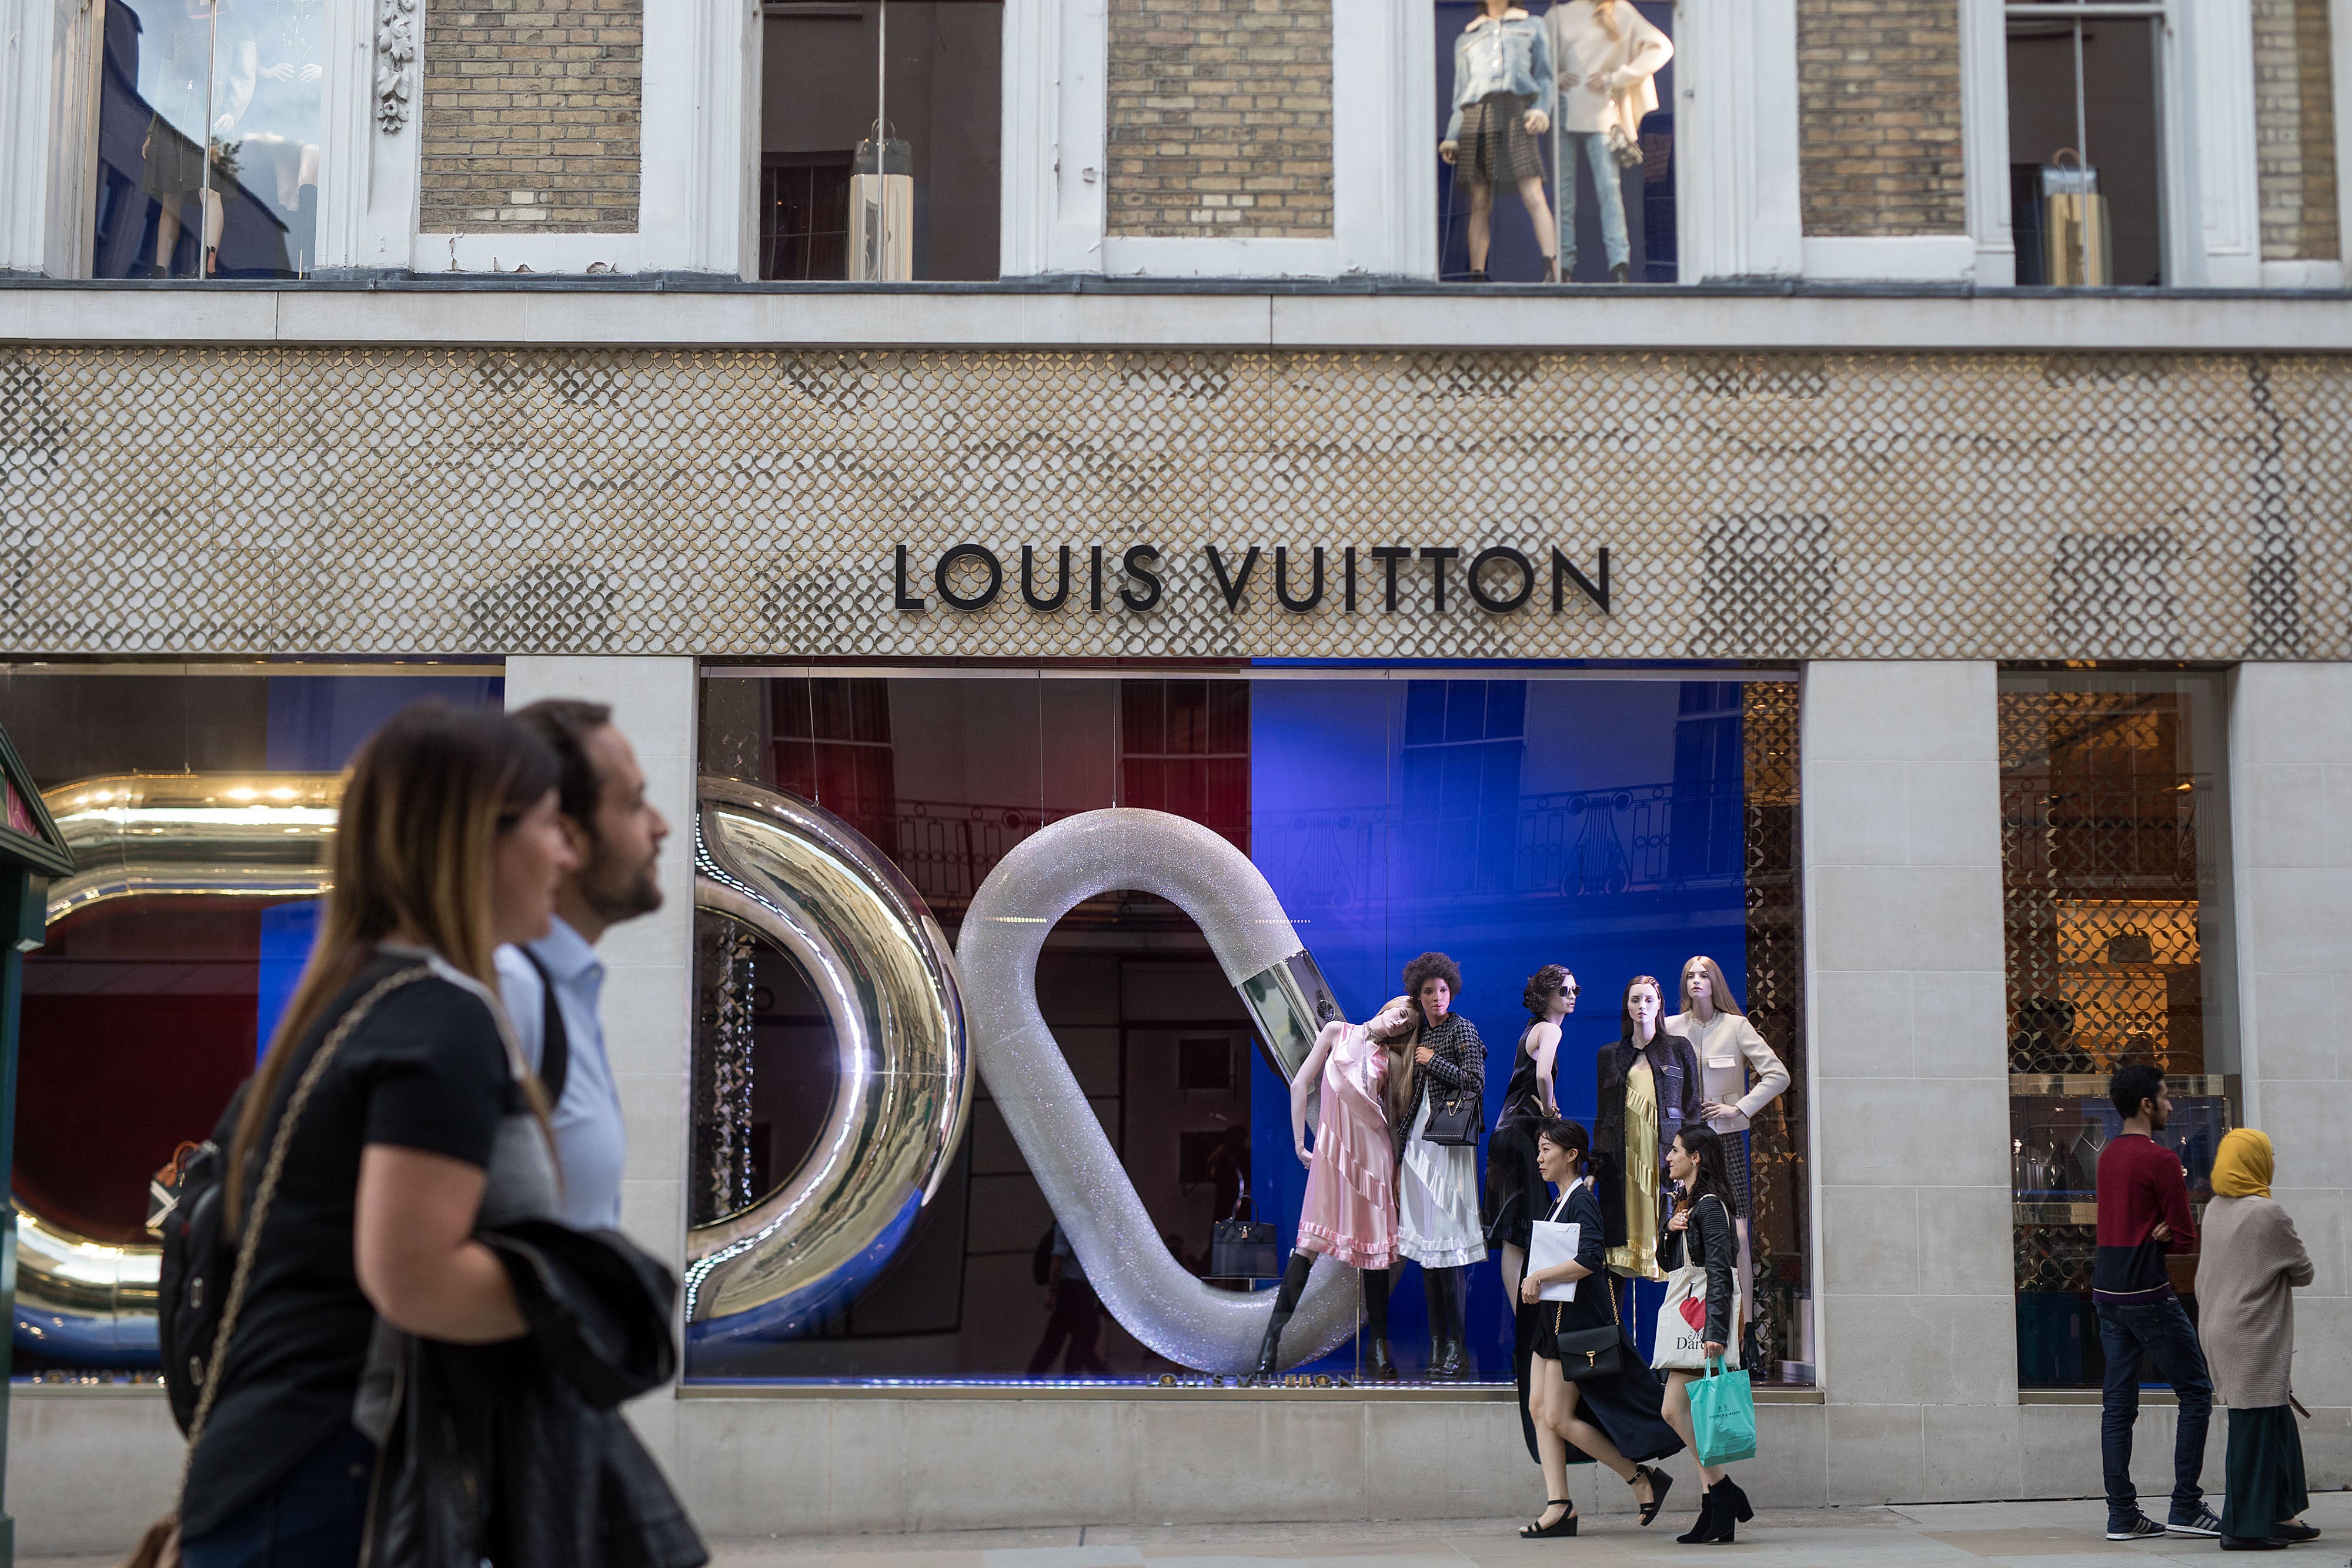 Louis vuitton is still the leading luxry brand2t